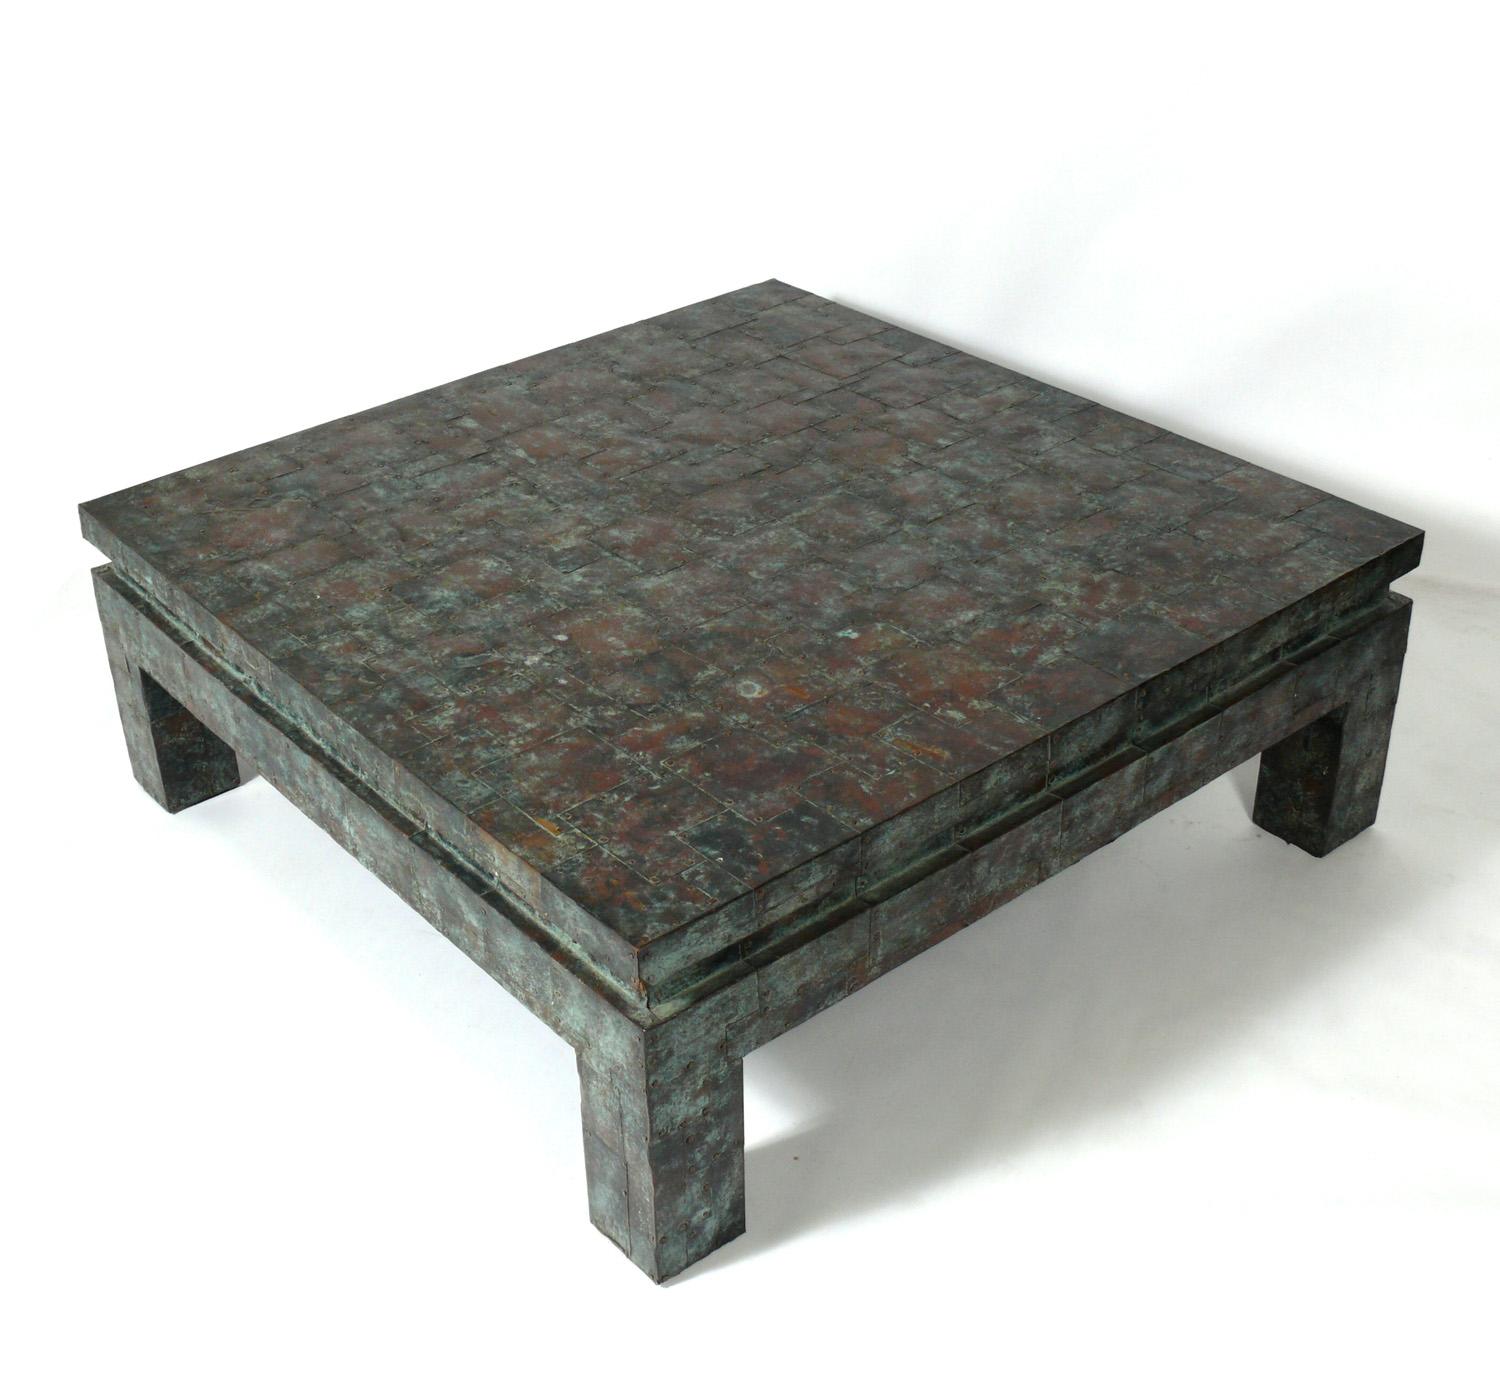 Mid century large scale copper patchwork coffee table, in the manner of Paul Evans, American, circa 1960s. Retains warm original overall verdigris patina. It measures an impressive 50